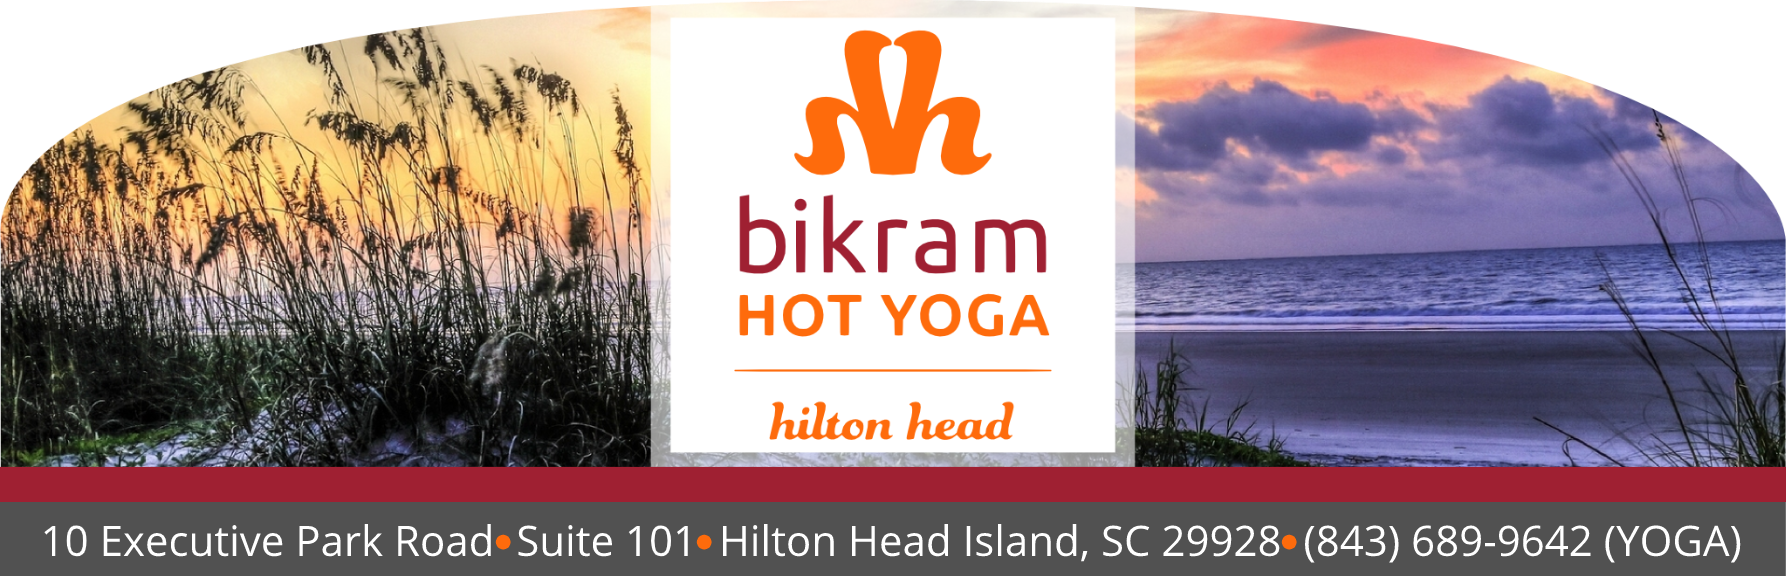 Bikram Hot Yoga Hilton Head - Thinking about taking a Bikram Hot Yoga  Class? Here's just some of the potential benefits! Bikram Hot Yoga allows  the body to stretch, detoxify, relieve stress